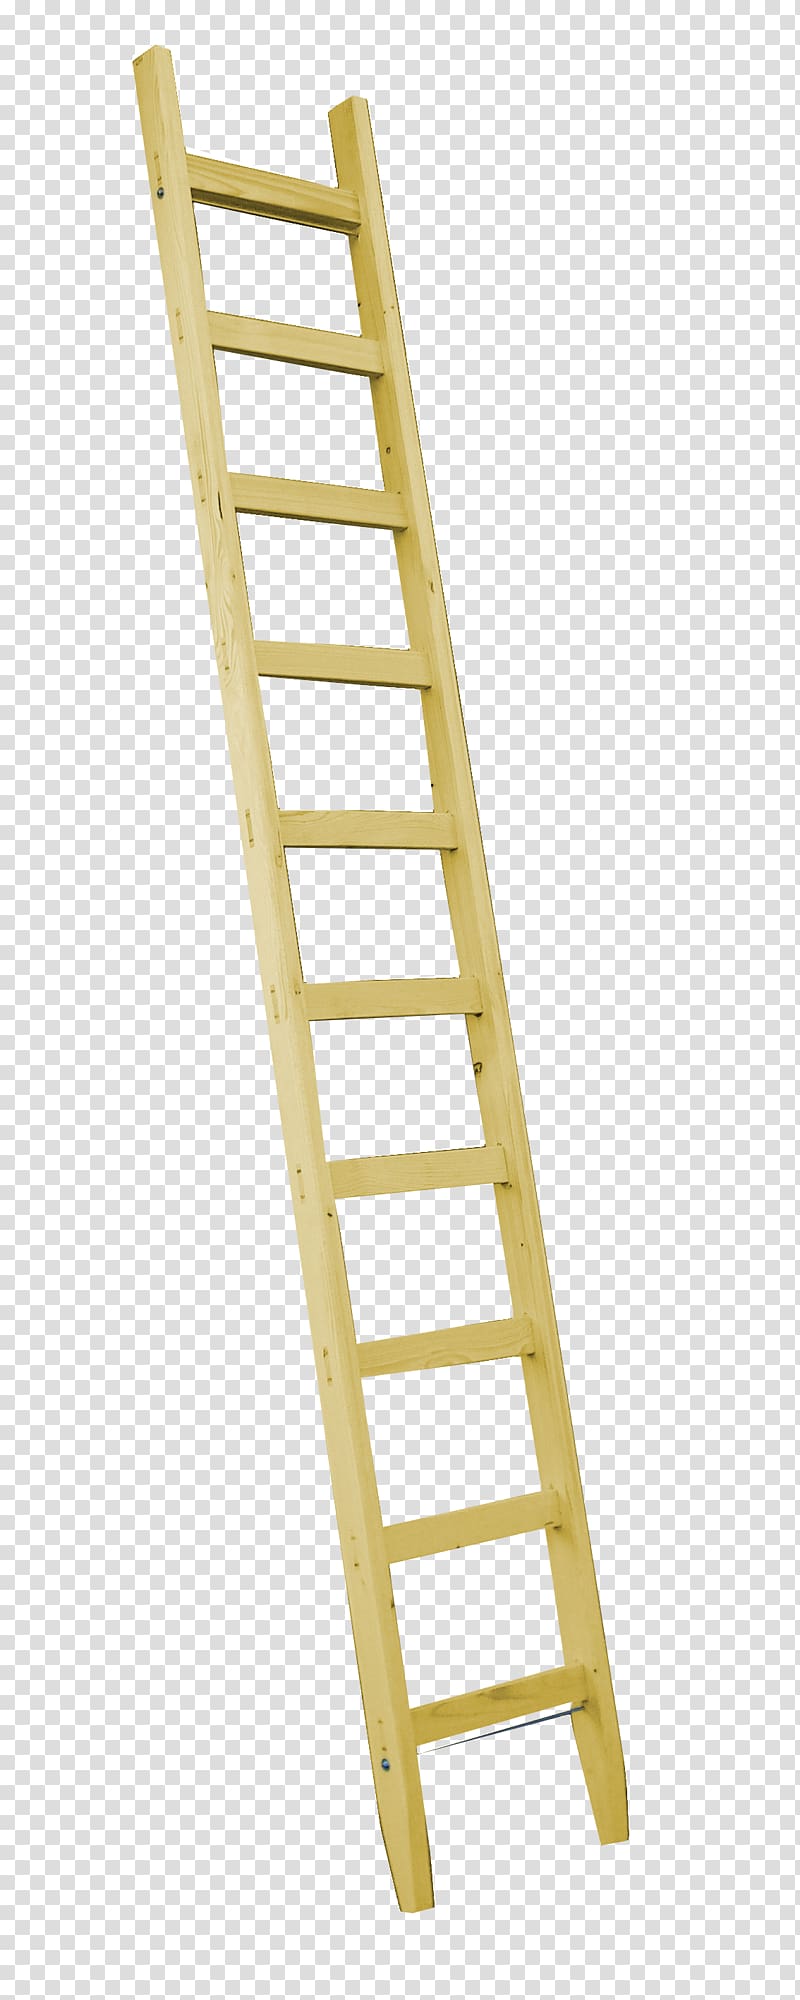 Ladder Aluminium Stair tread Stairs Height, ladder transparent background PNG clipart